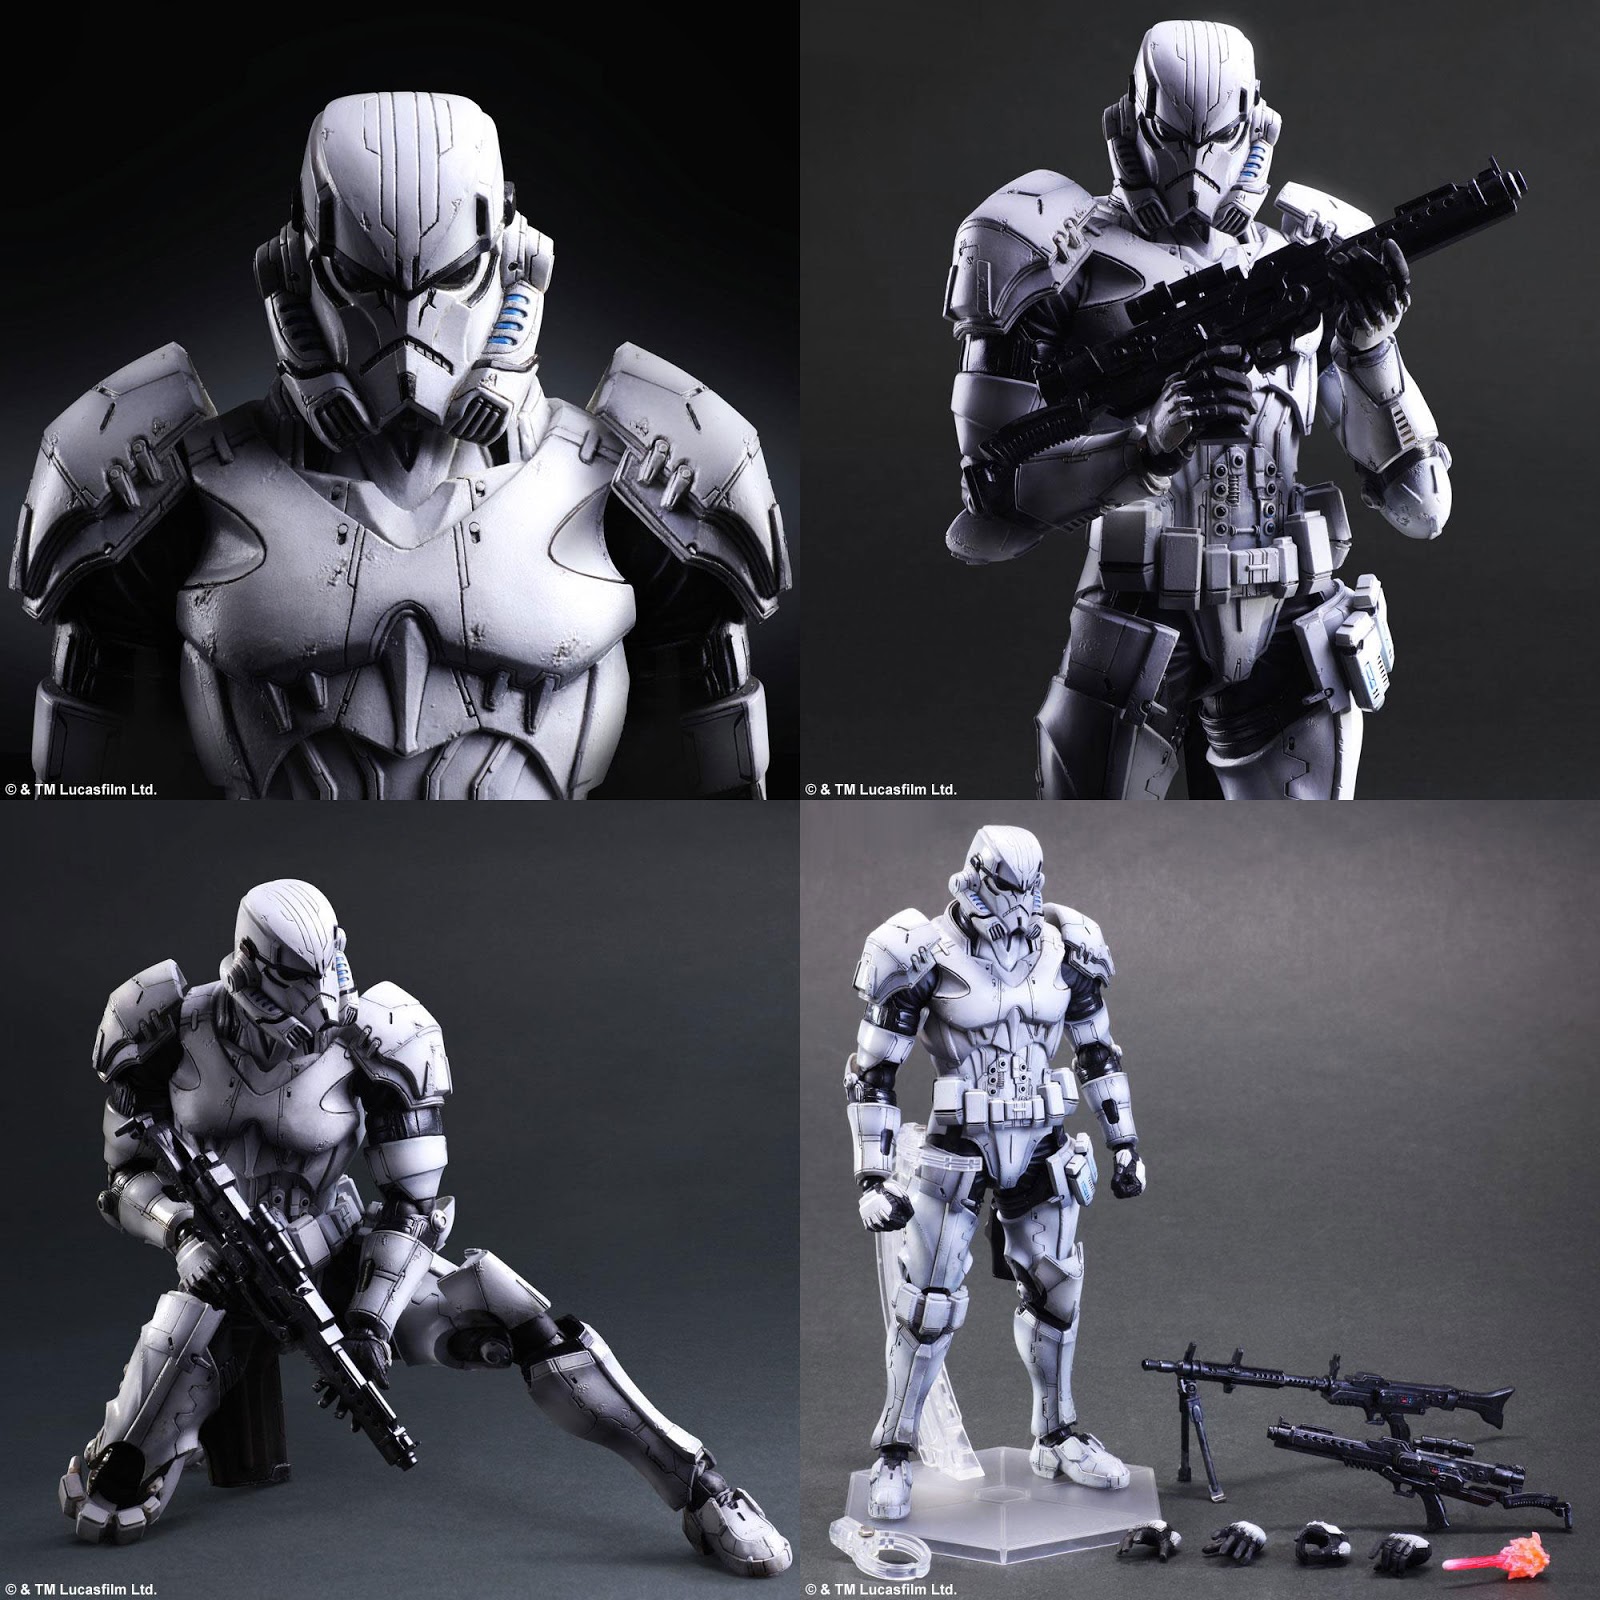 Star Wars Variant Play Arts Kai from SQUARE ENIX - Trooper Star Wars Variant Play Arts Kai From SQUARE ENIX 2